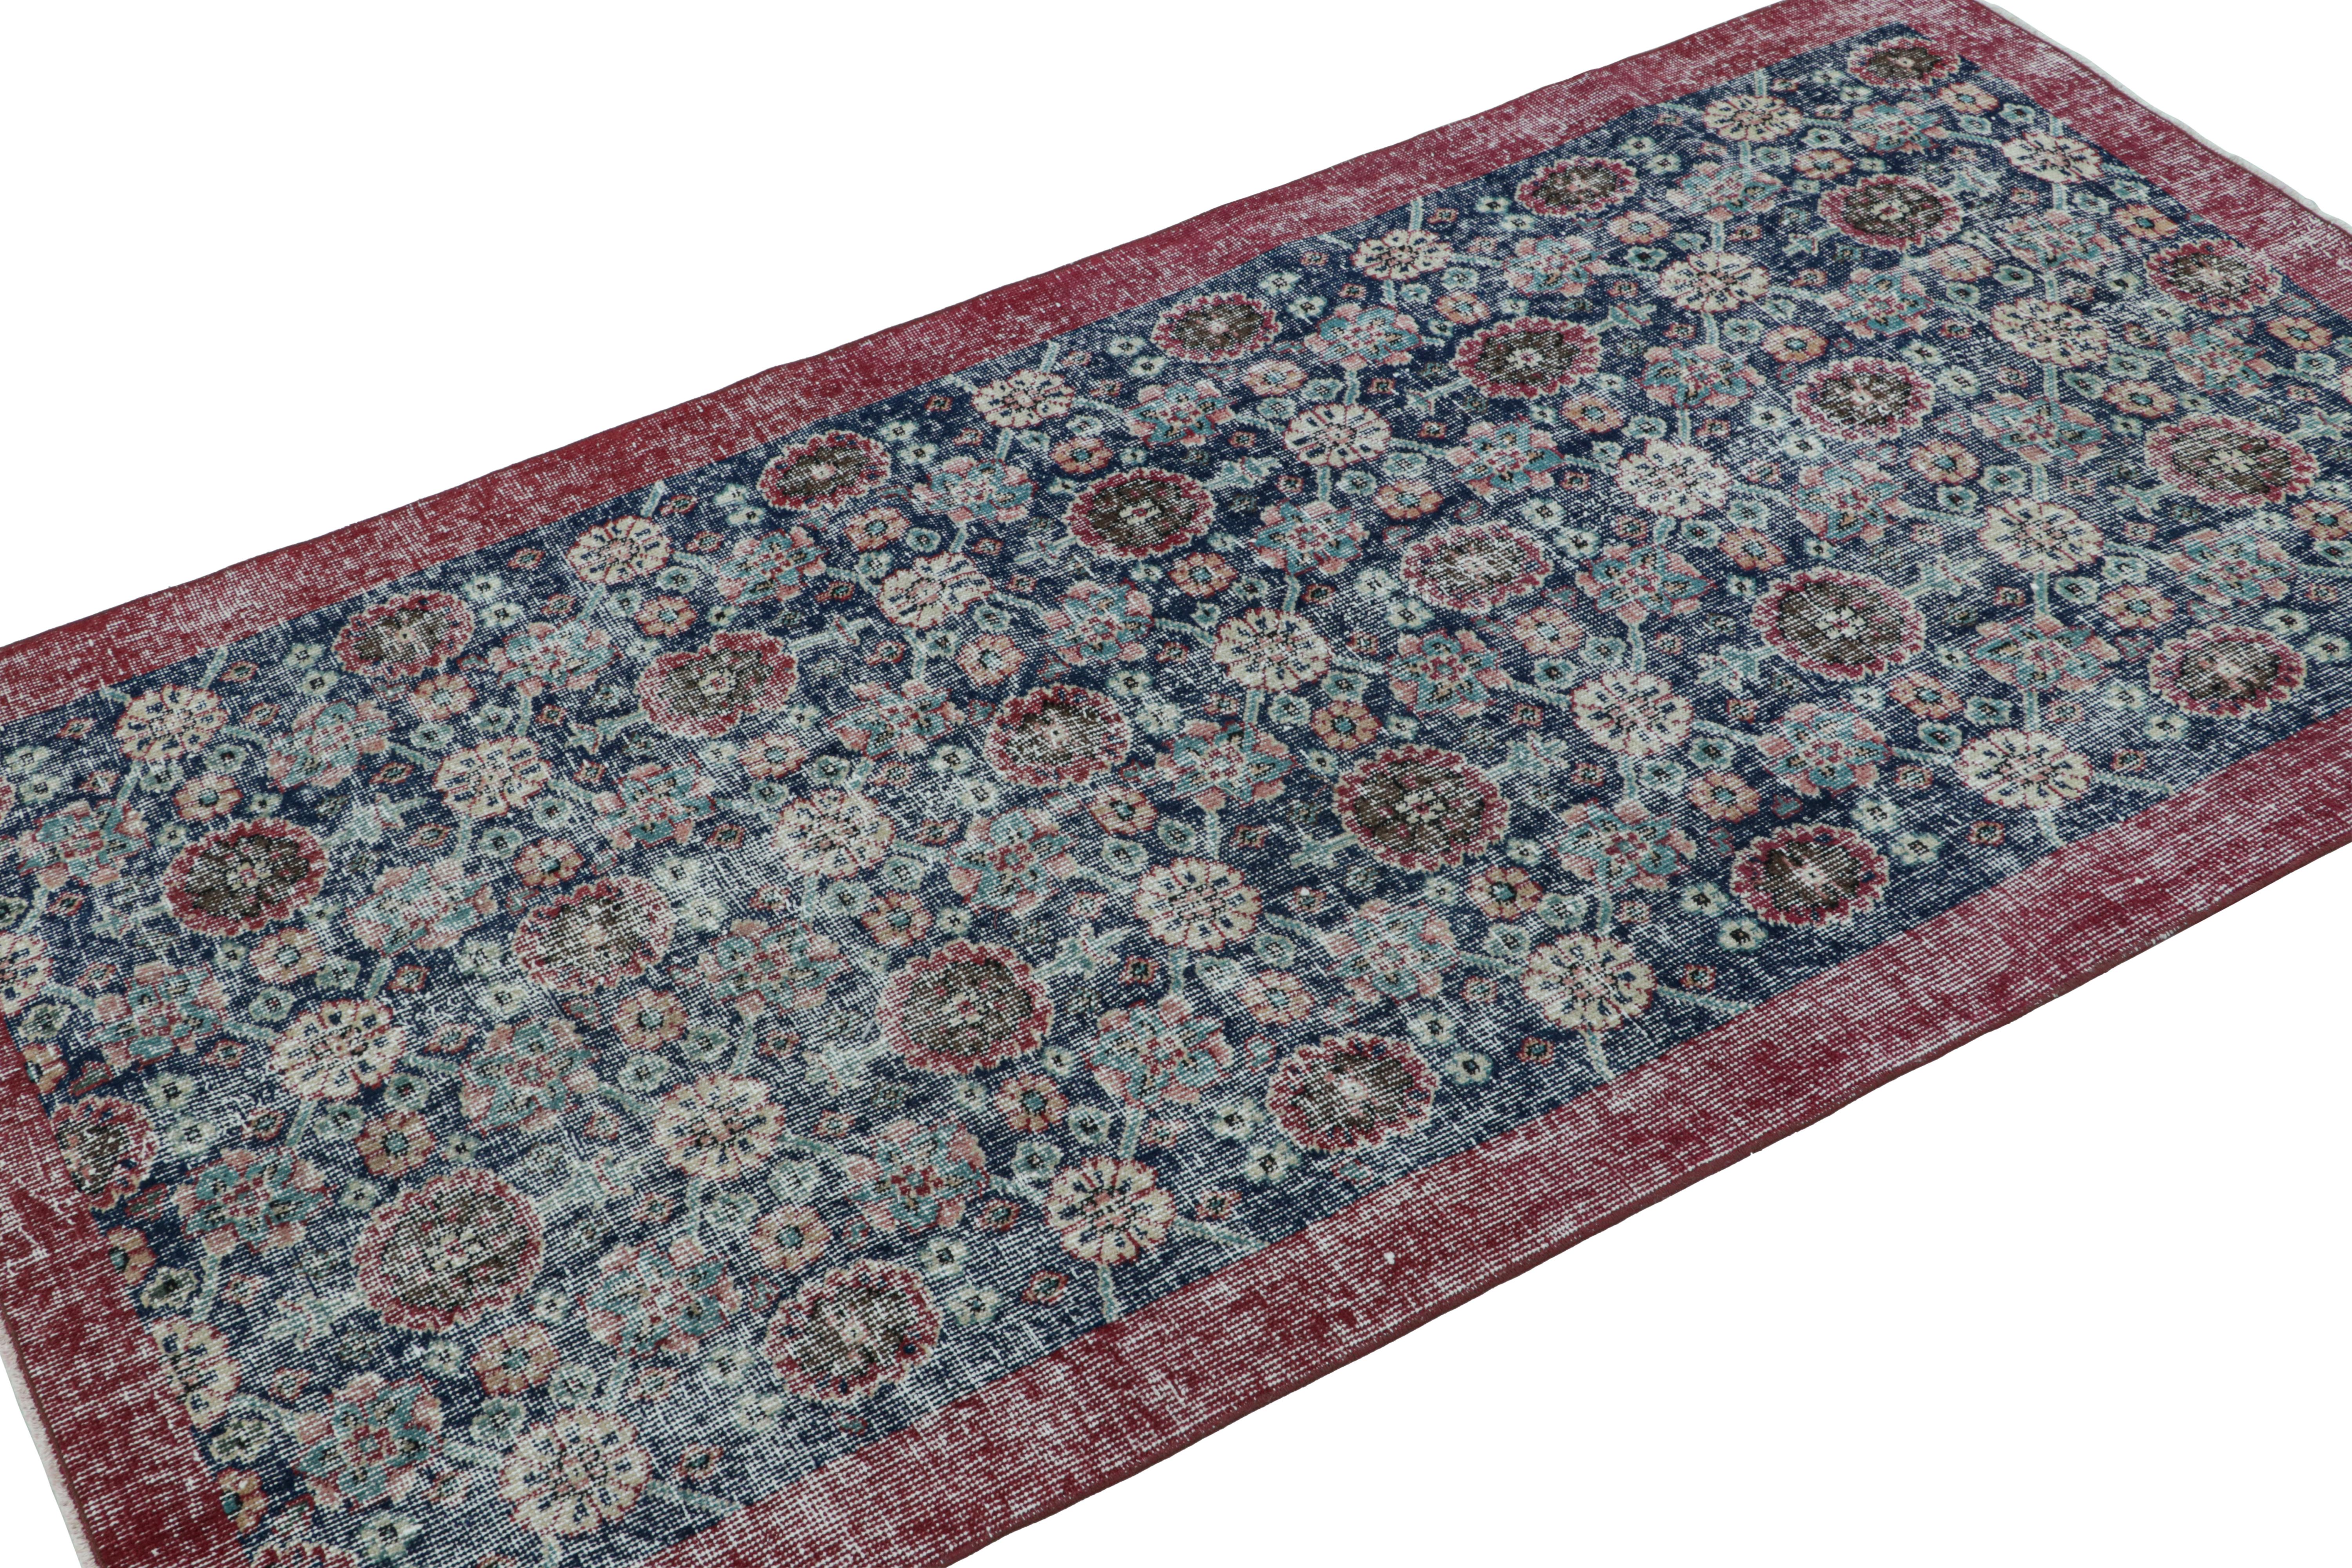 Hand-knotted in wool circa 1960-1970, this 4x7 vintage runner rug is believed to originate from the rare works of mid-century Turkish artist Zeki Müren. 

On the Design: 

Admirers of the craft may appreciate this vintage rug that carries all-over